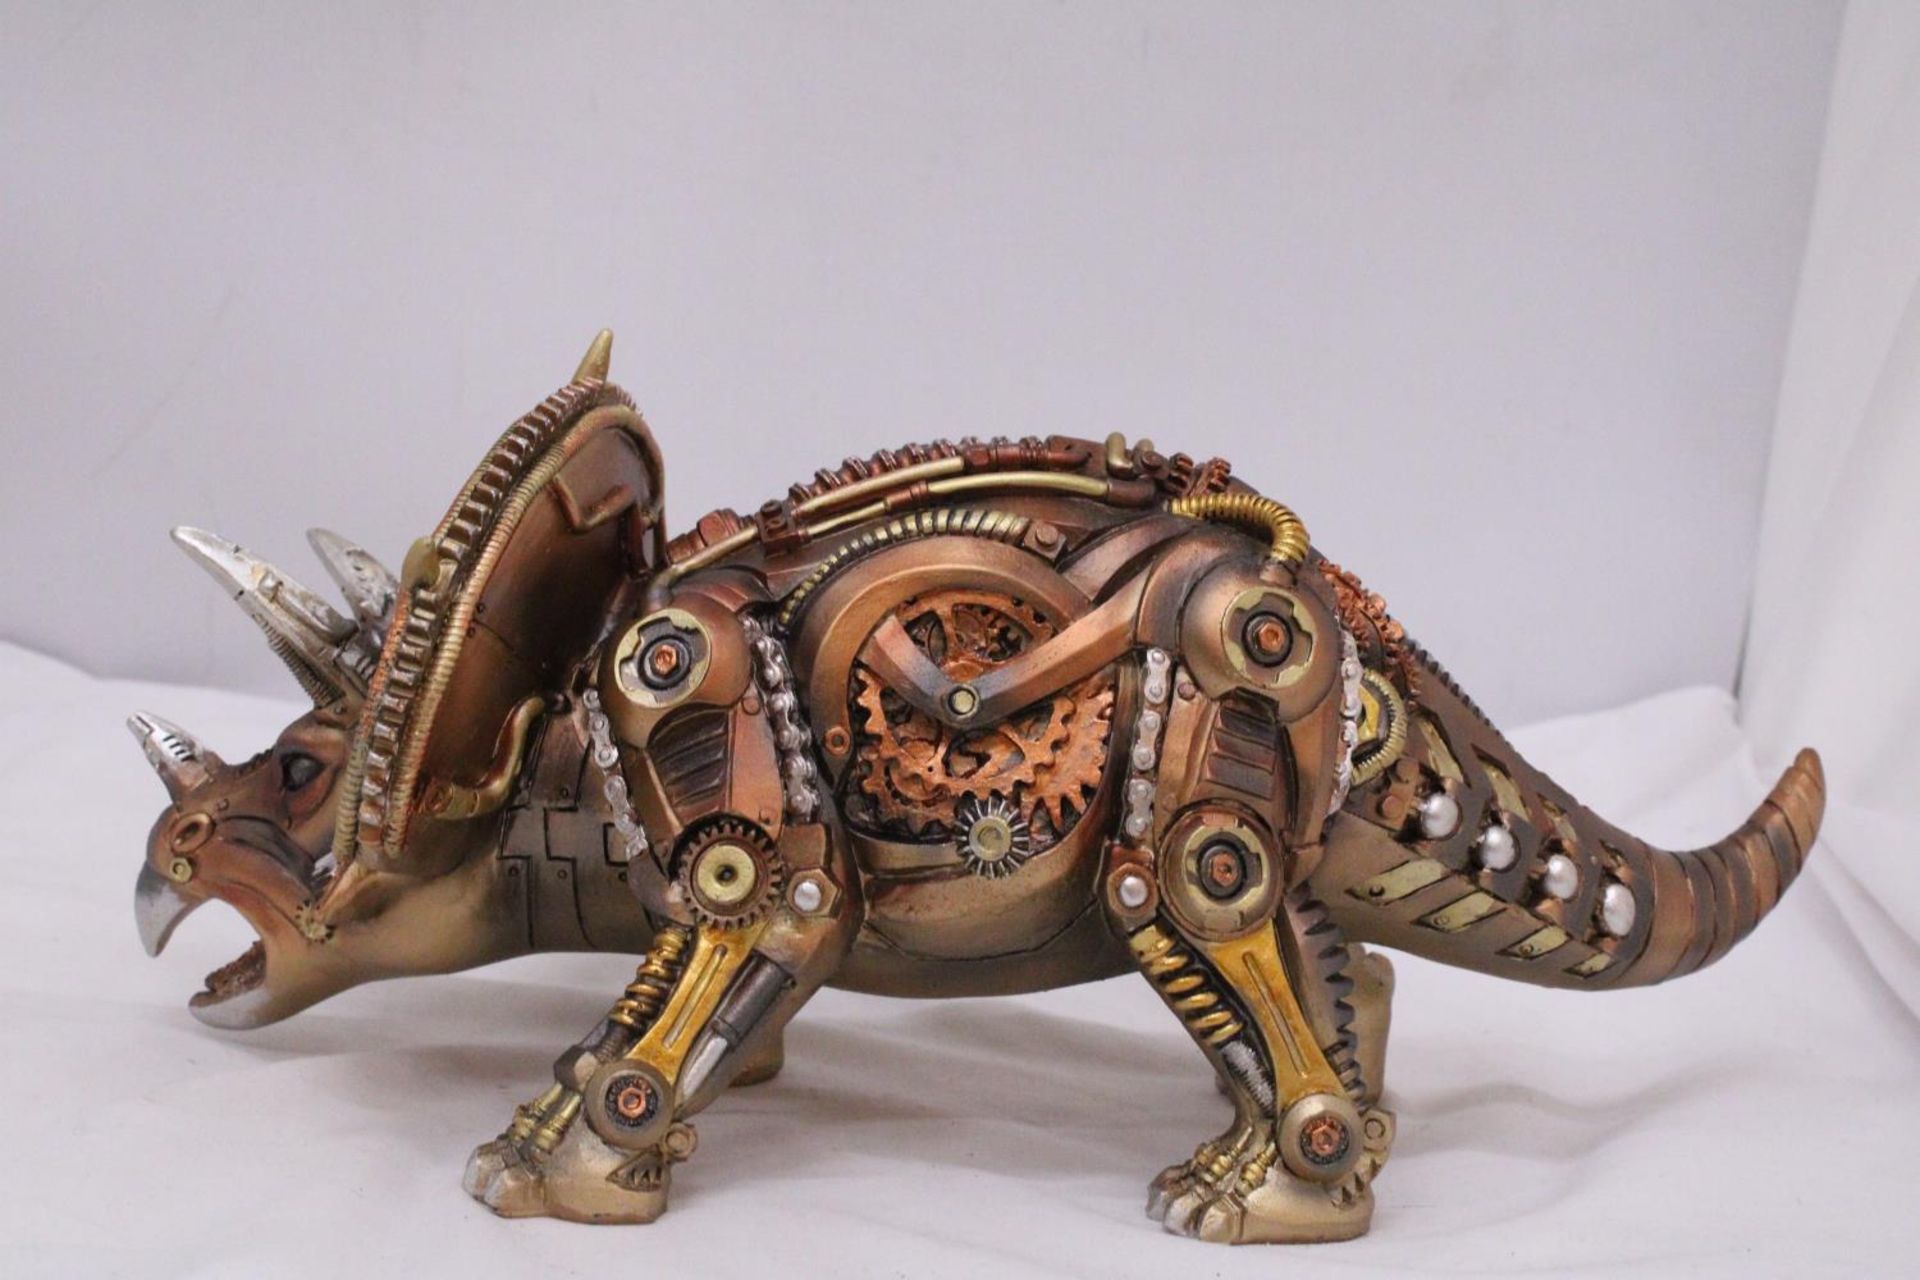 A MECHANICAL STYLE TRICERATOPS - Image 4 of 5